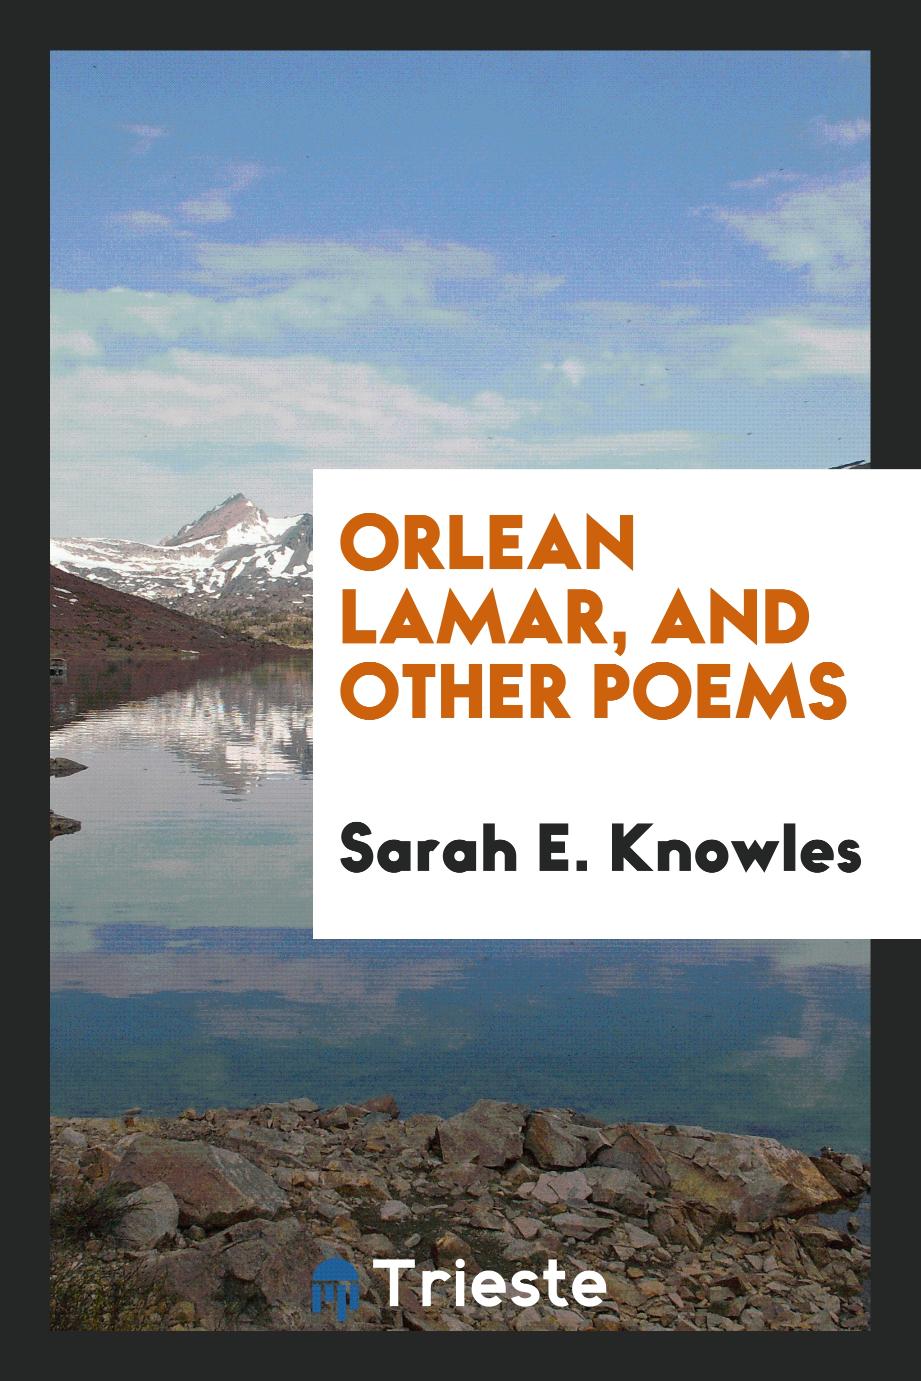 Orlean Lamar, and Other Poems